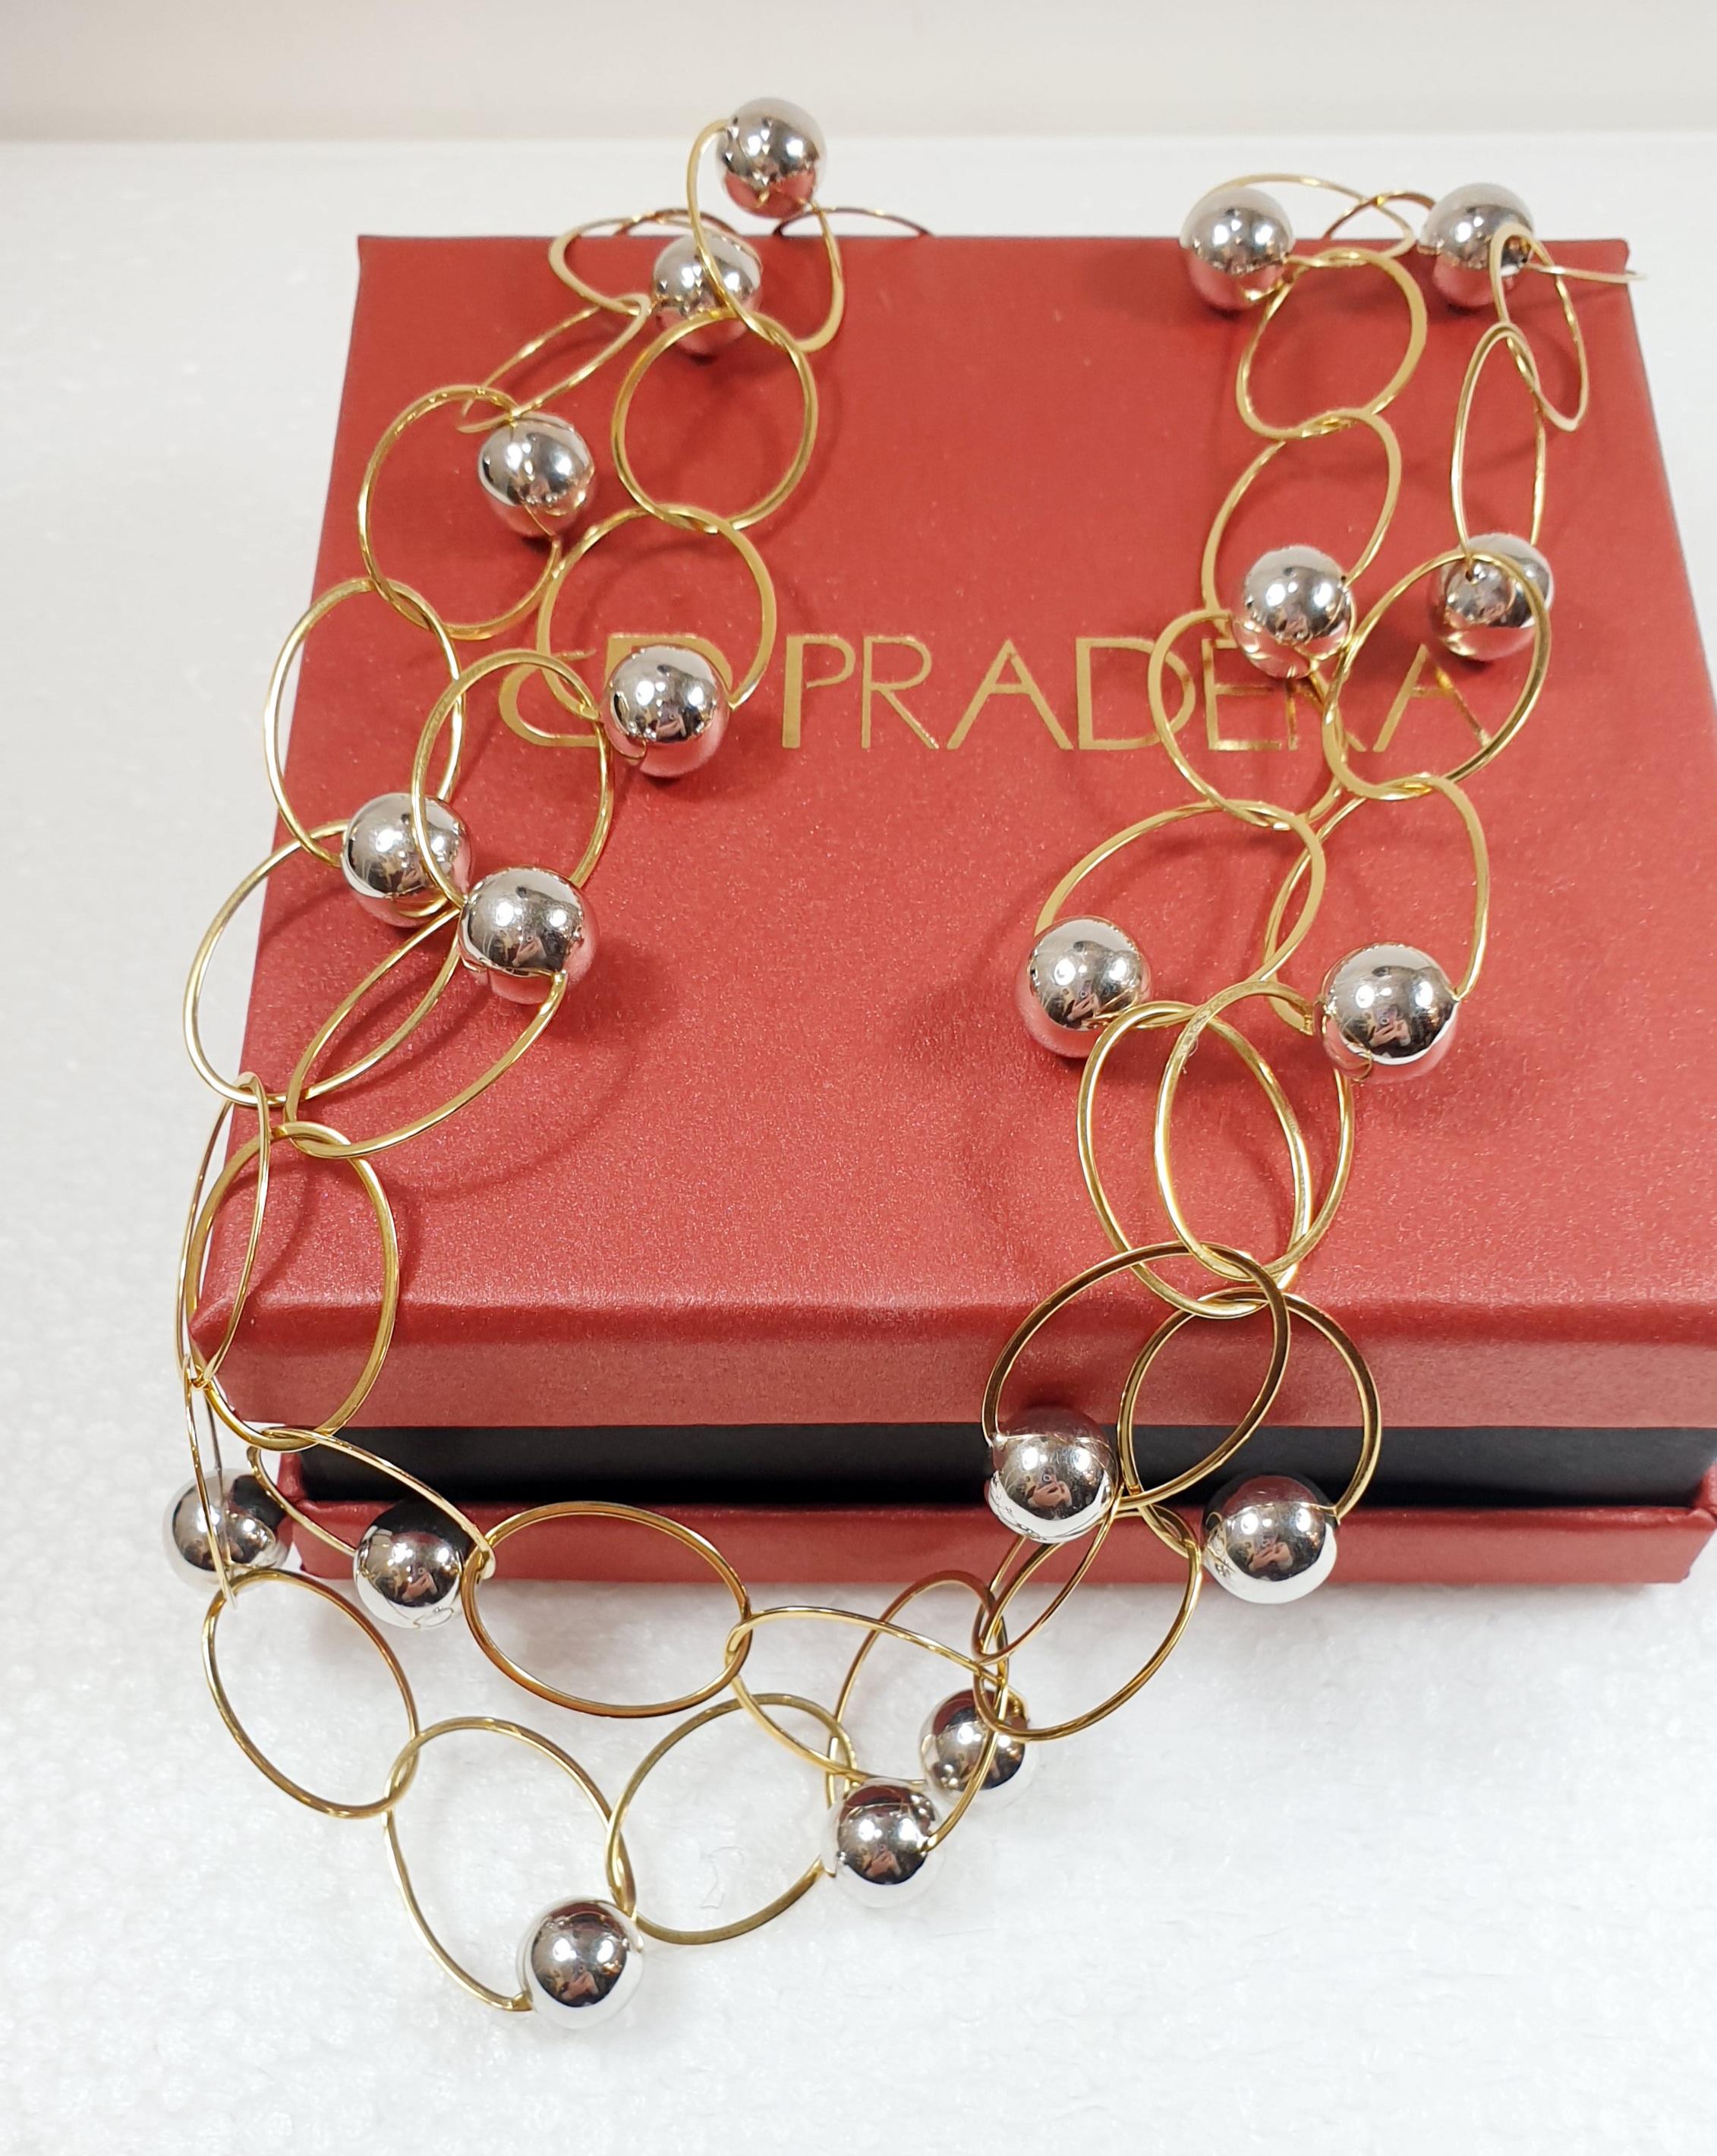 Two-Strand Necklace in Yellow Gold with White Gold Balls For Sale 1